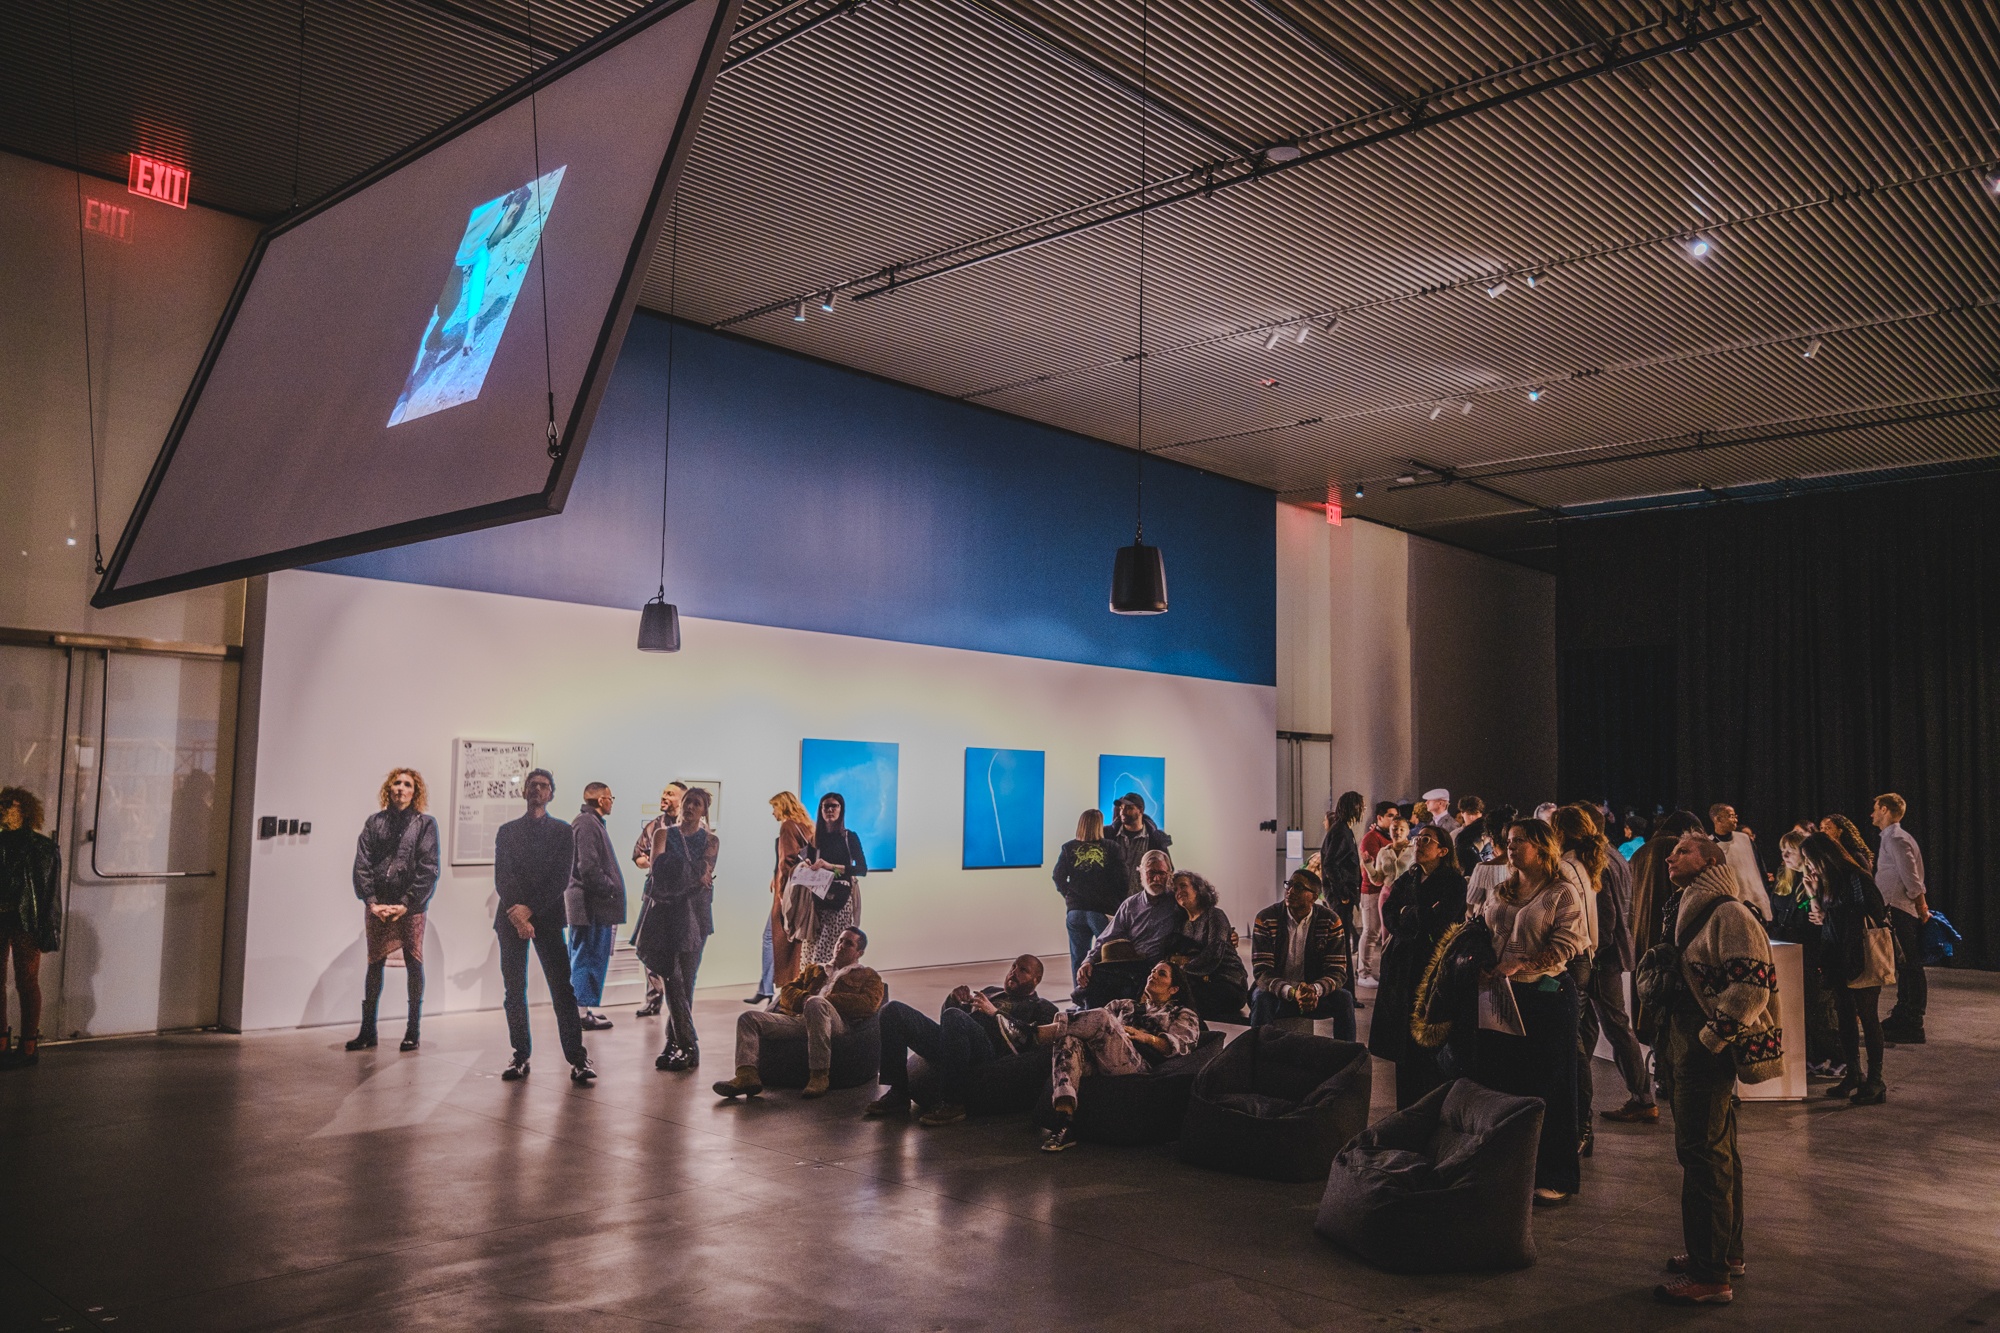 An audience gathers in a gallery standing and sitting on bean bag chairs beneath a film screen that hangs from the ceiling on a diagonal. They look up at the screen to watch a film. Behind them, three photographic prints of clouds created by a skywriting plane hang on the wall.